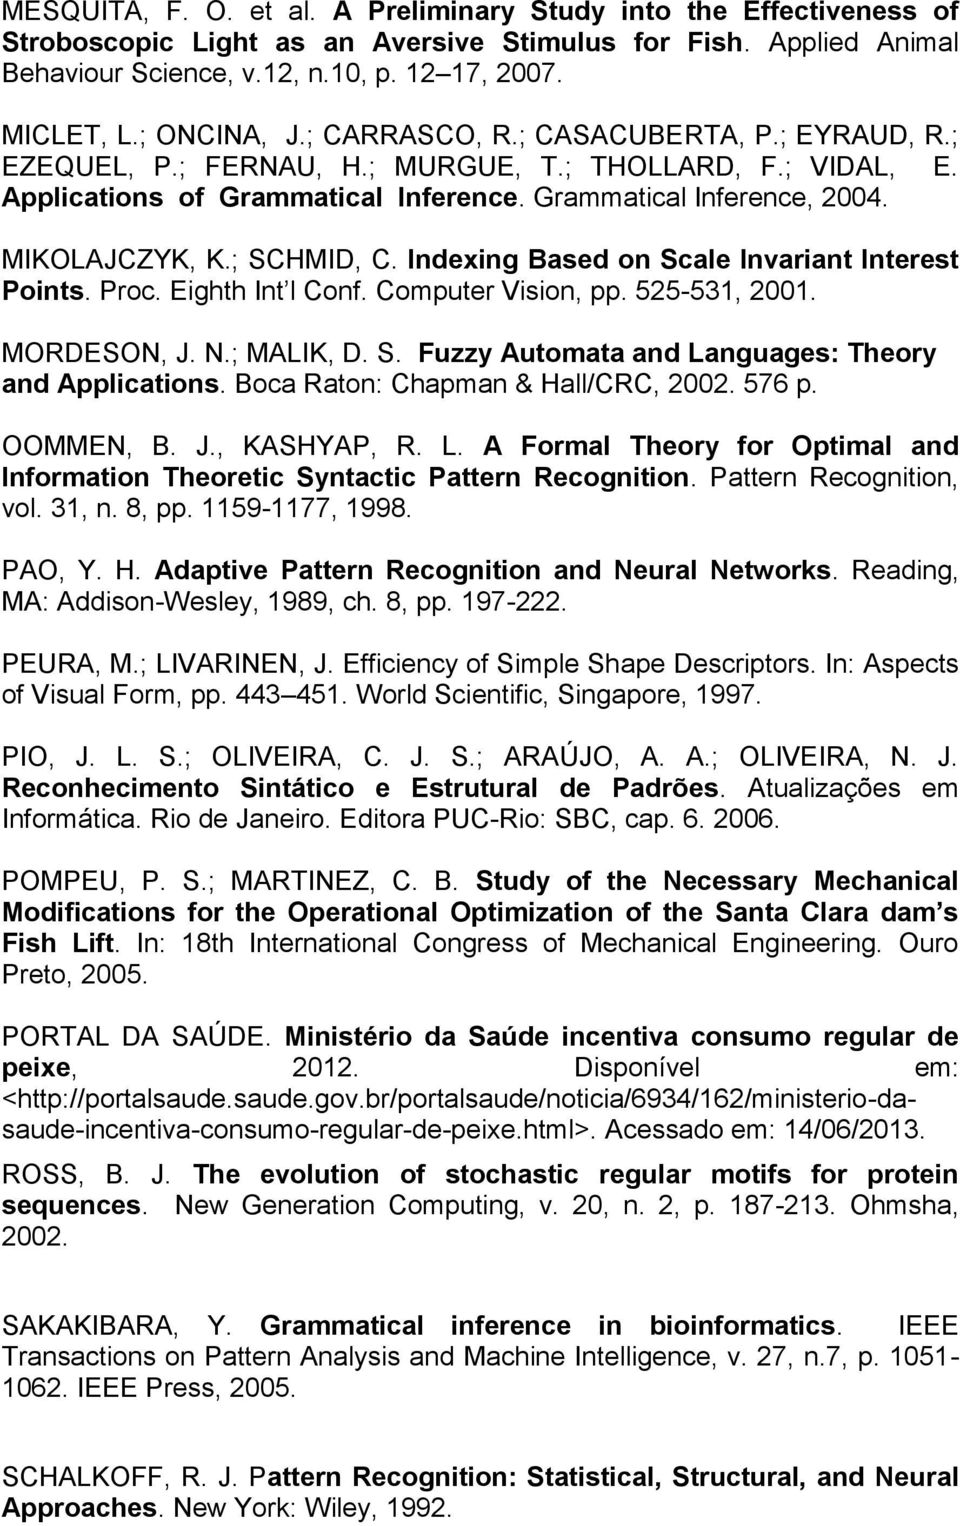 MIKOLAJCZYK, K.; SCHMID, C. Indexing Based on Scale Invariant Interest Points. Proc. Eighth Int l Conf. Computer Vision, pp. 525-531, 2001. MORDESON, J. N.; MALIK, D. S. Fuzzy Automata and Languages: Theory and Applications.